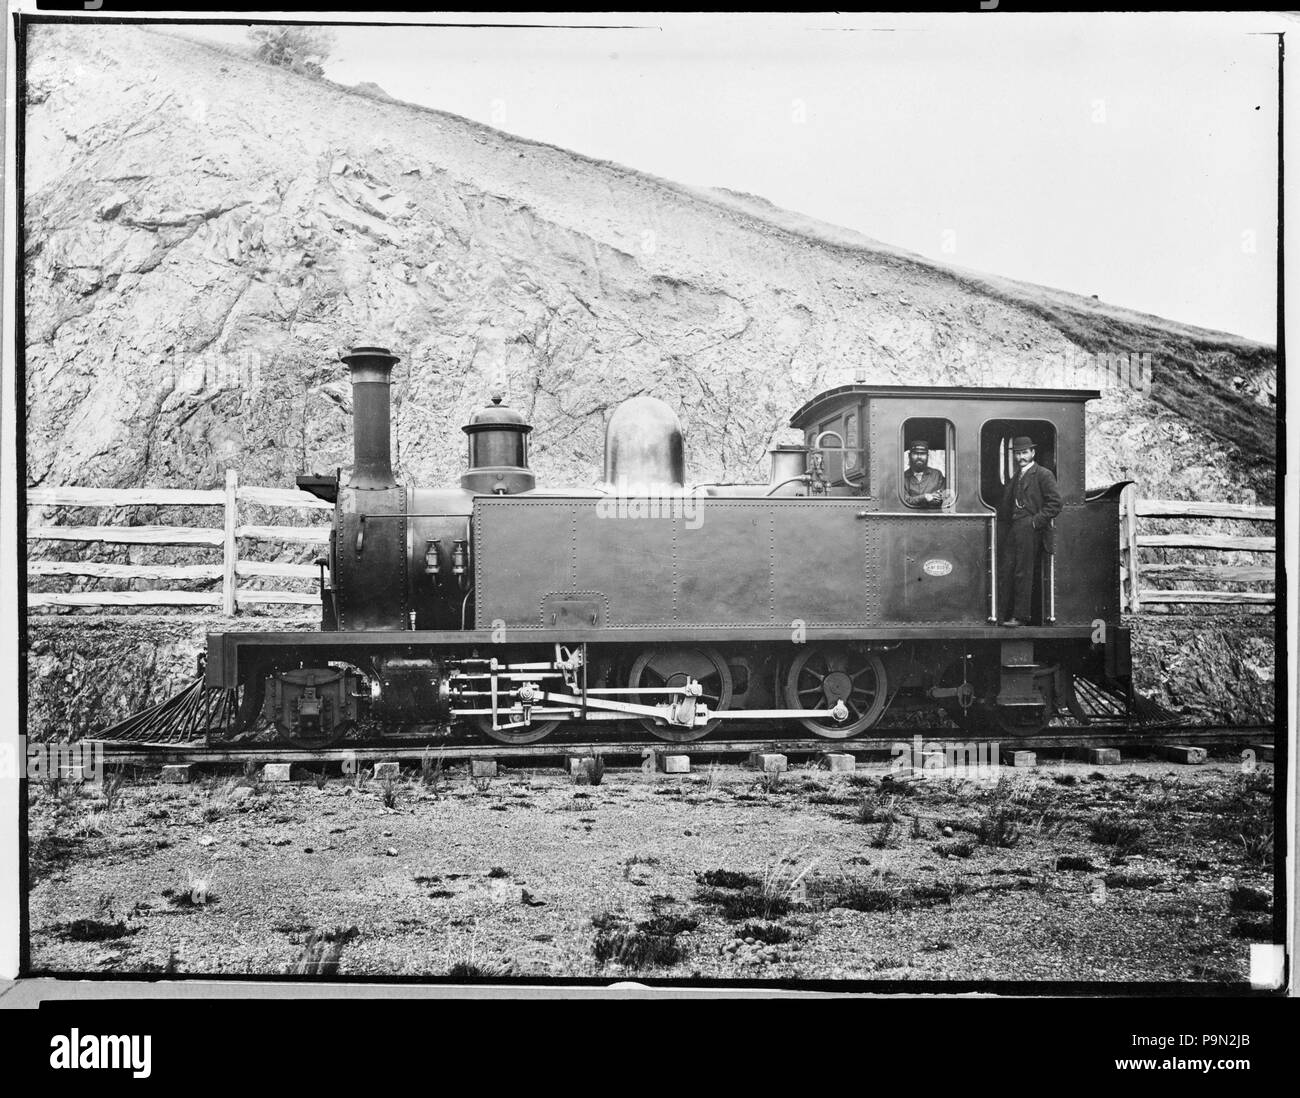 303 Steam locomotive built by Manning, Wardle in 1884 (maker's No. 920), purchased for the Wellington and Manawatu Railway, circa 18855 ATLIB 336167 Stock Photo